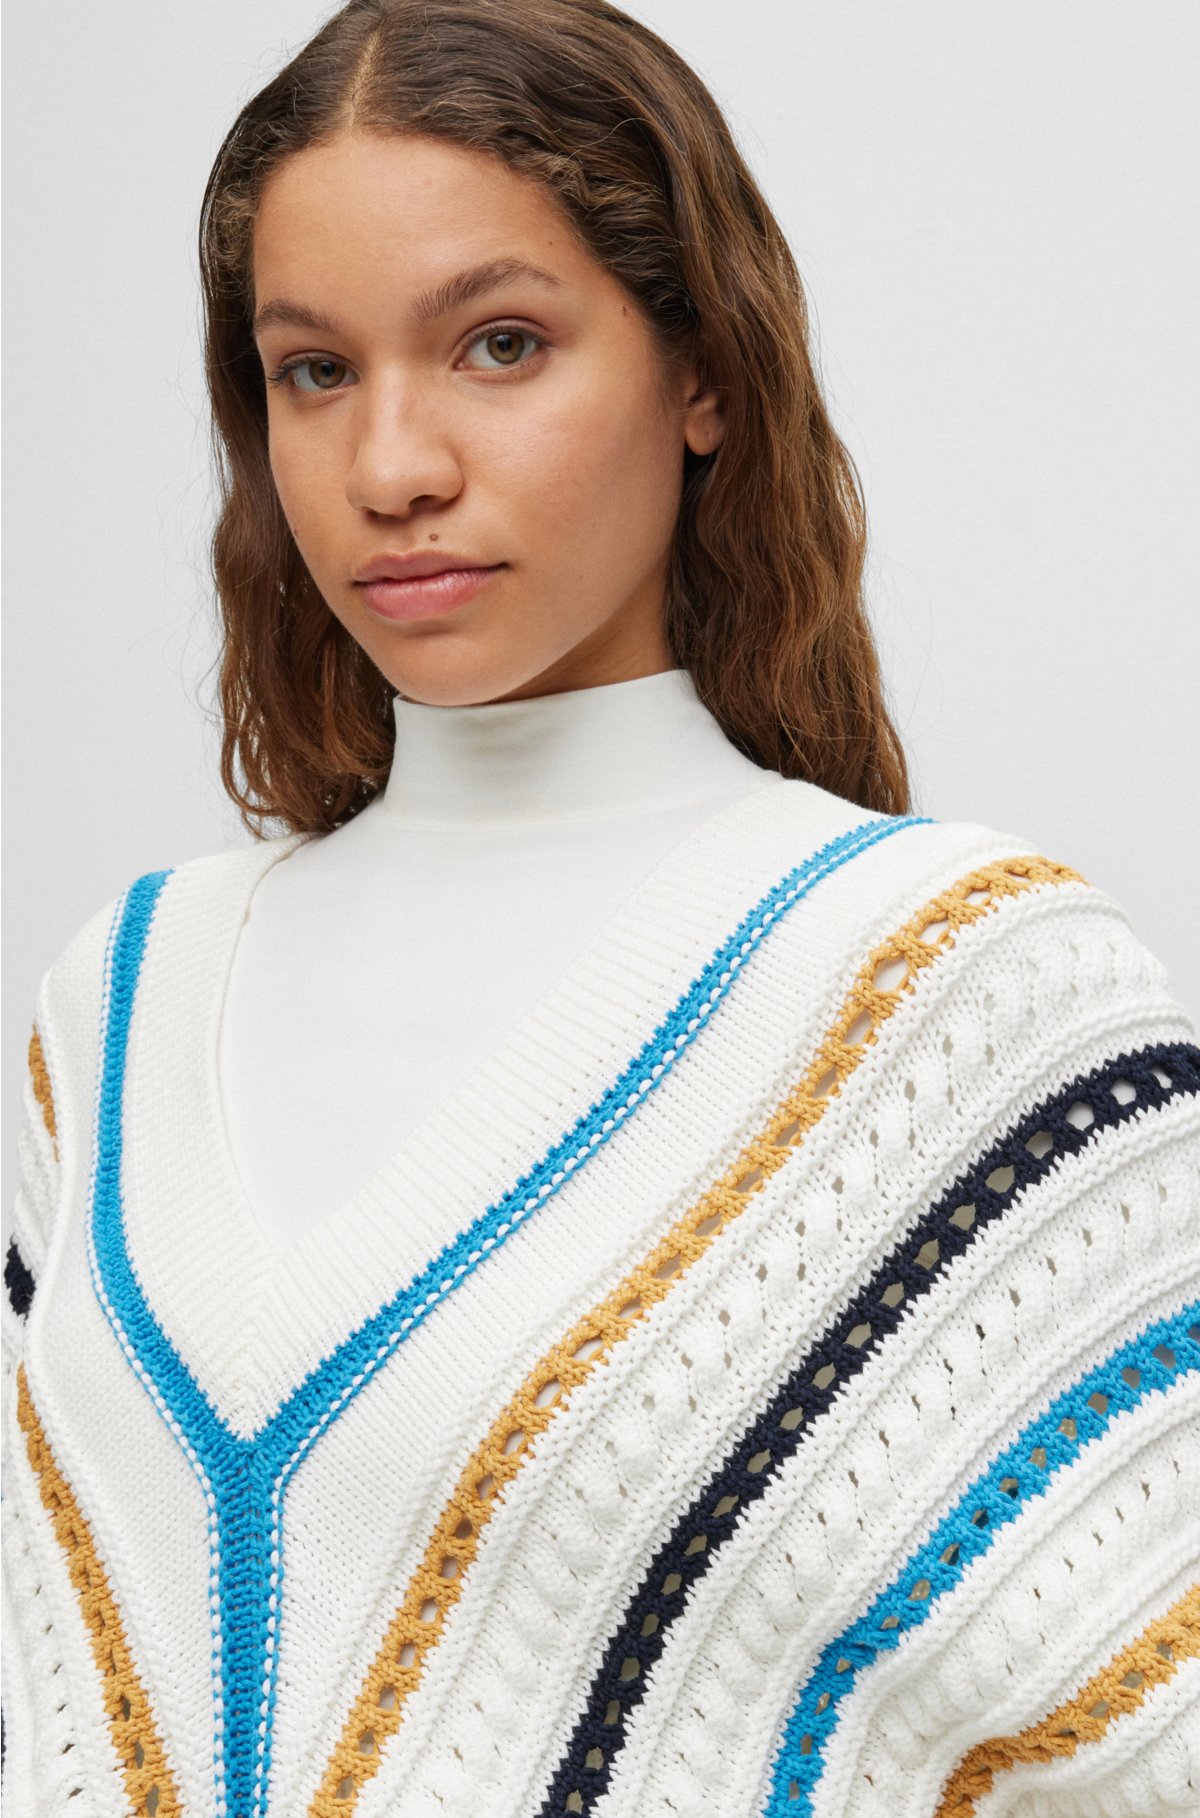 Structured knit sweater - Green - Monki